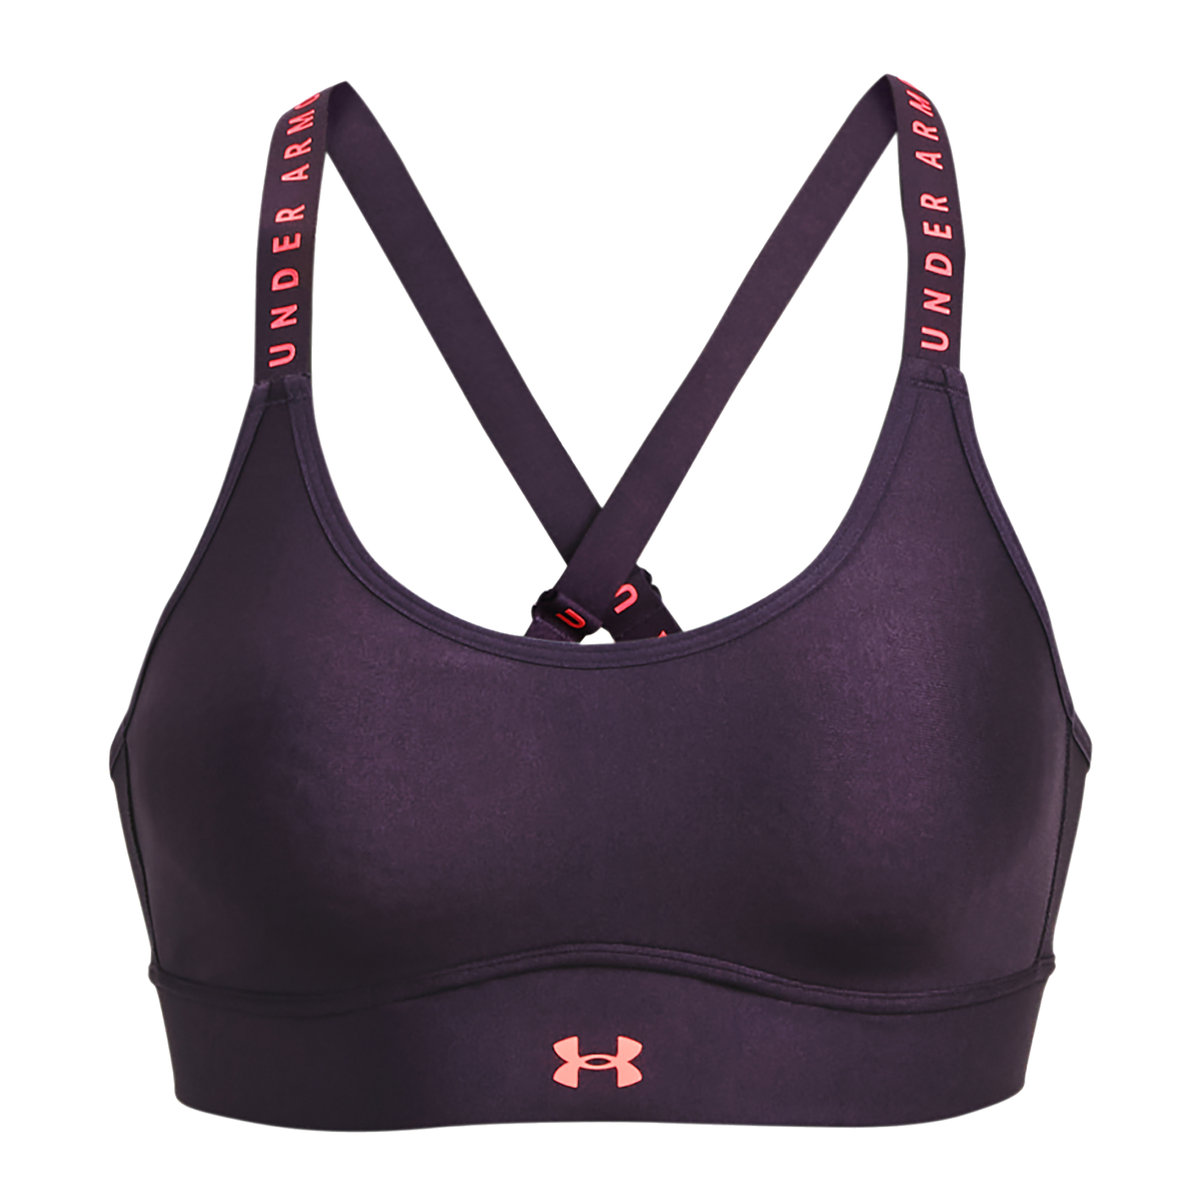 Biustonosz fitness Under Armour Infinity Covered Mid fioletowy 1363353-541 XS